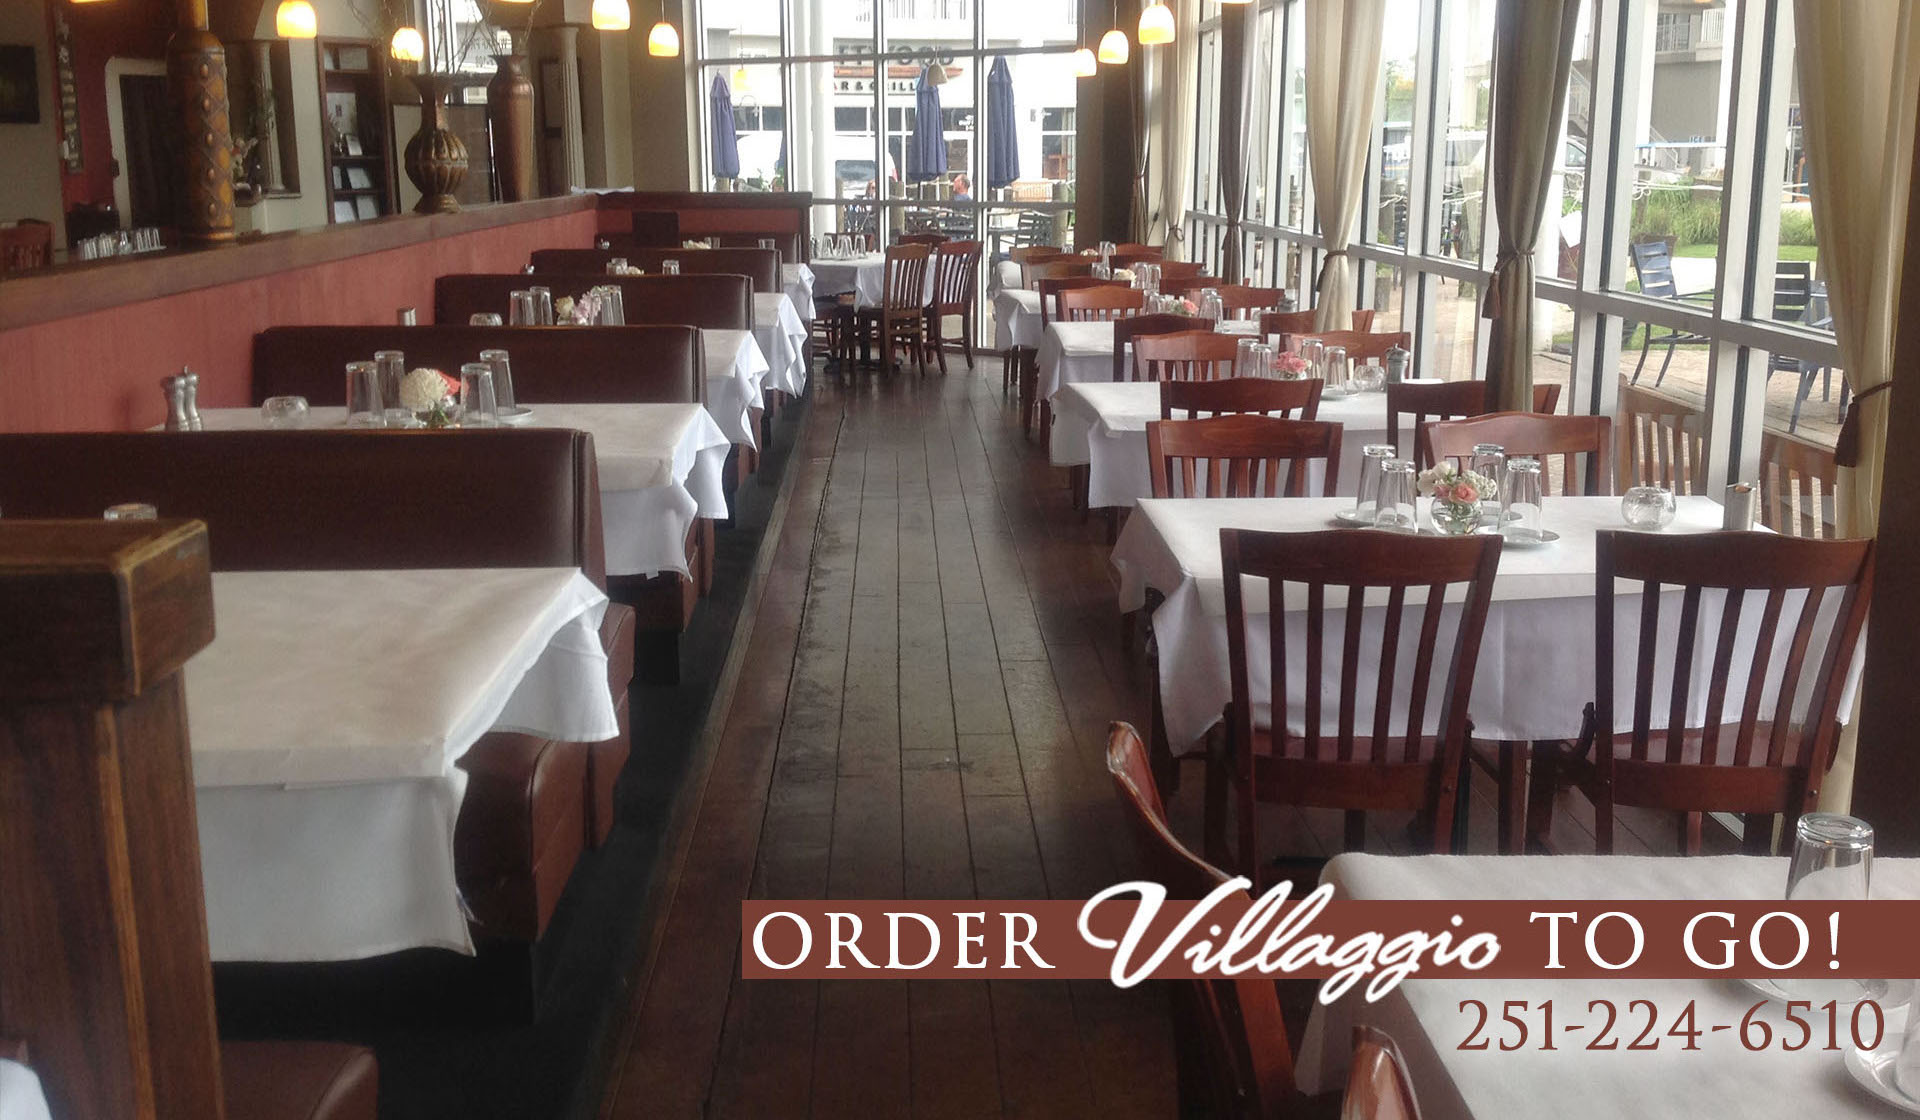 Togo orders at Villaggio Grille at The Wharf